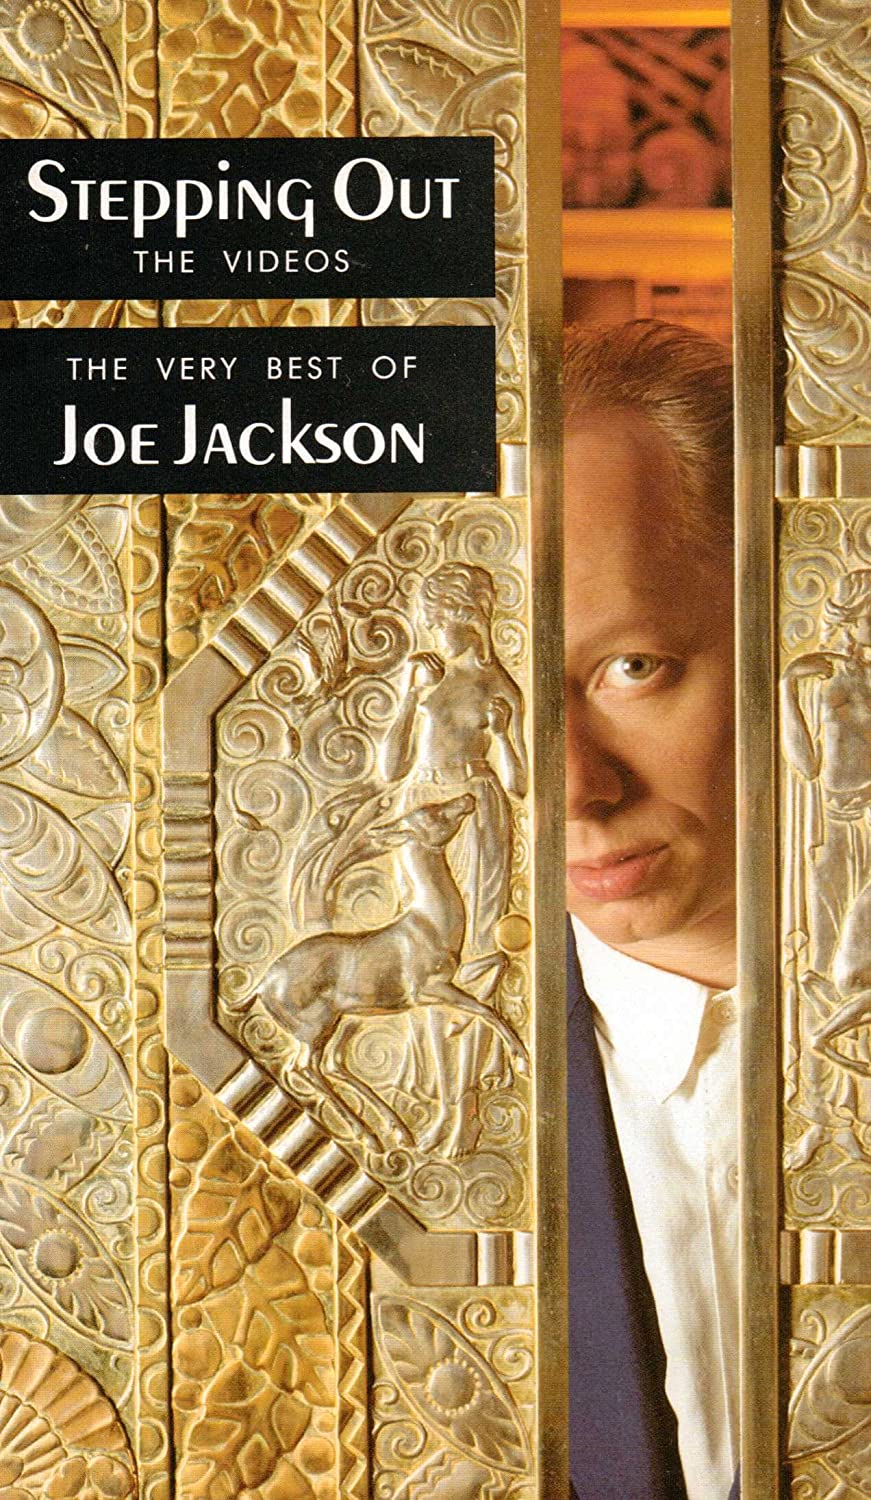 Stepping out - The Very Best of Joe Jackson